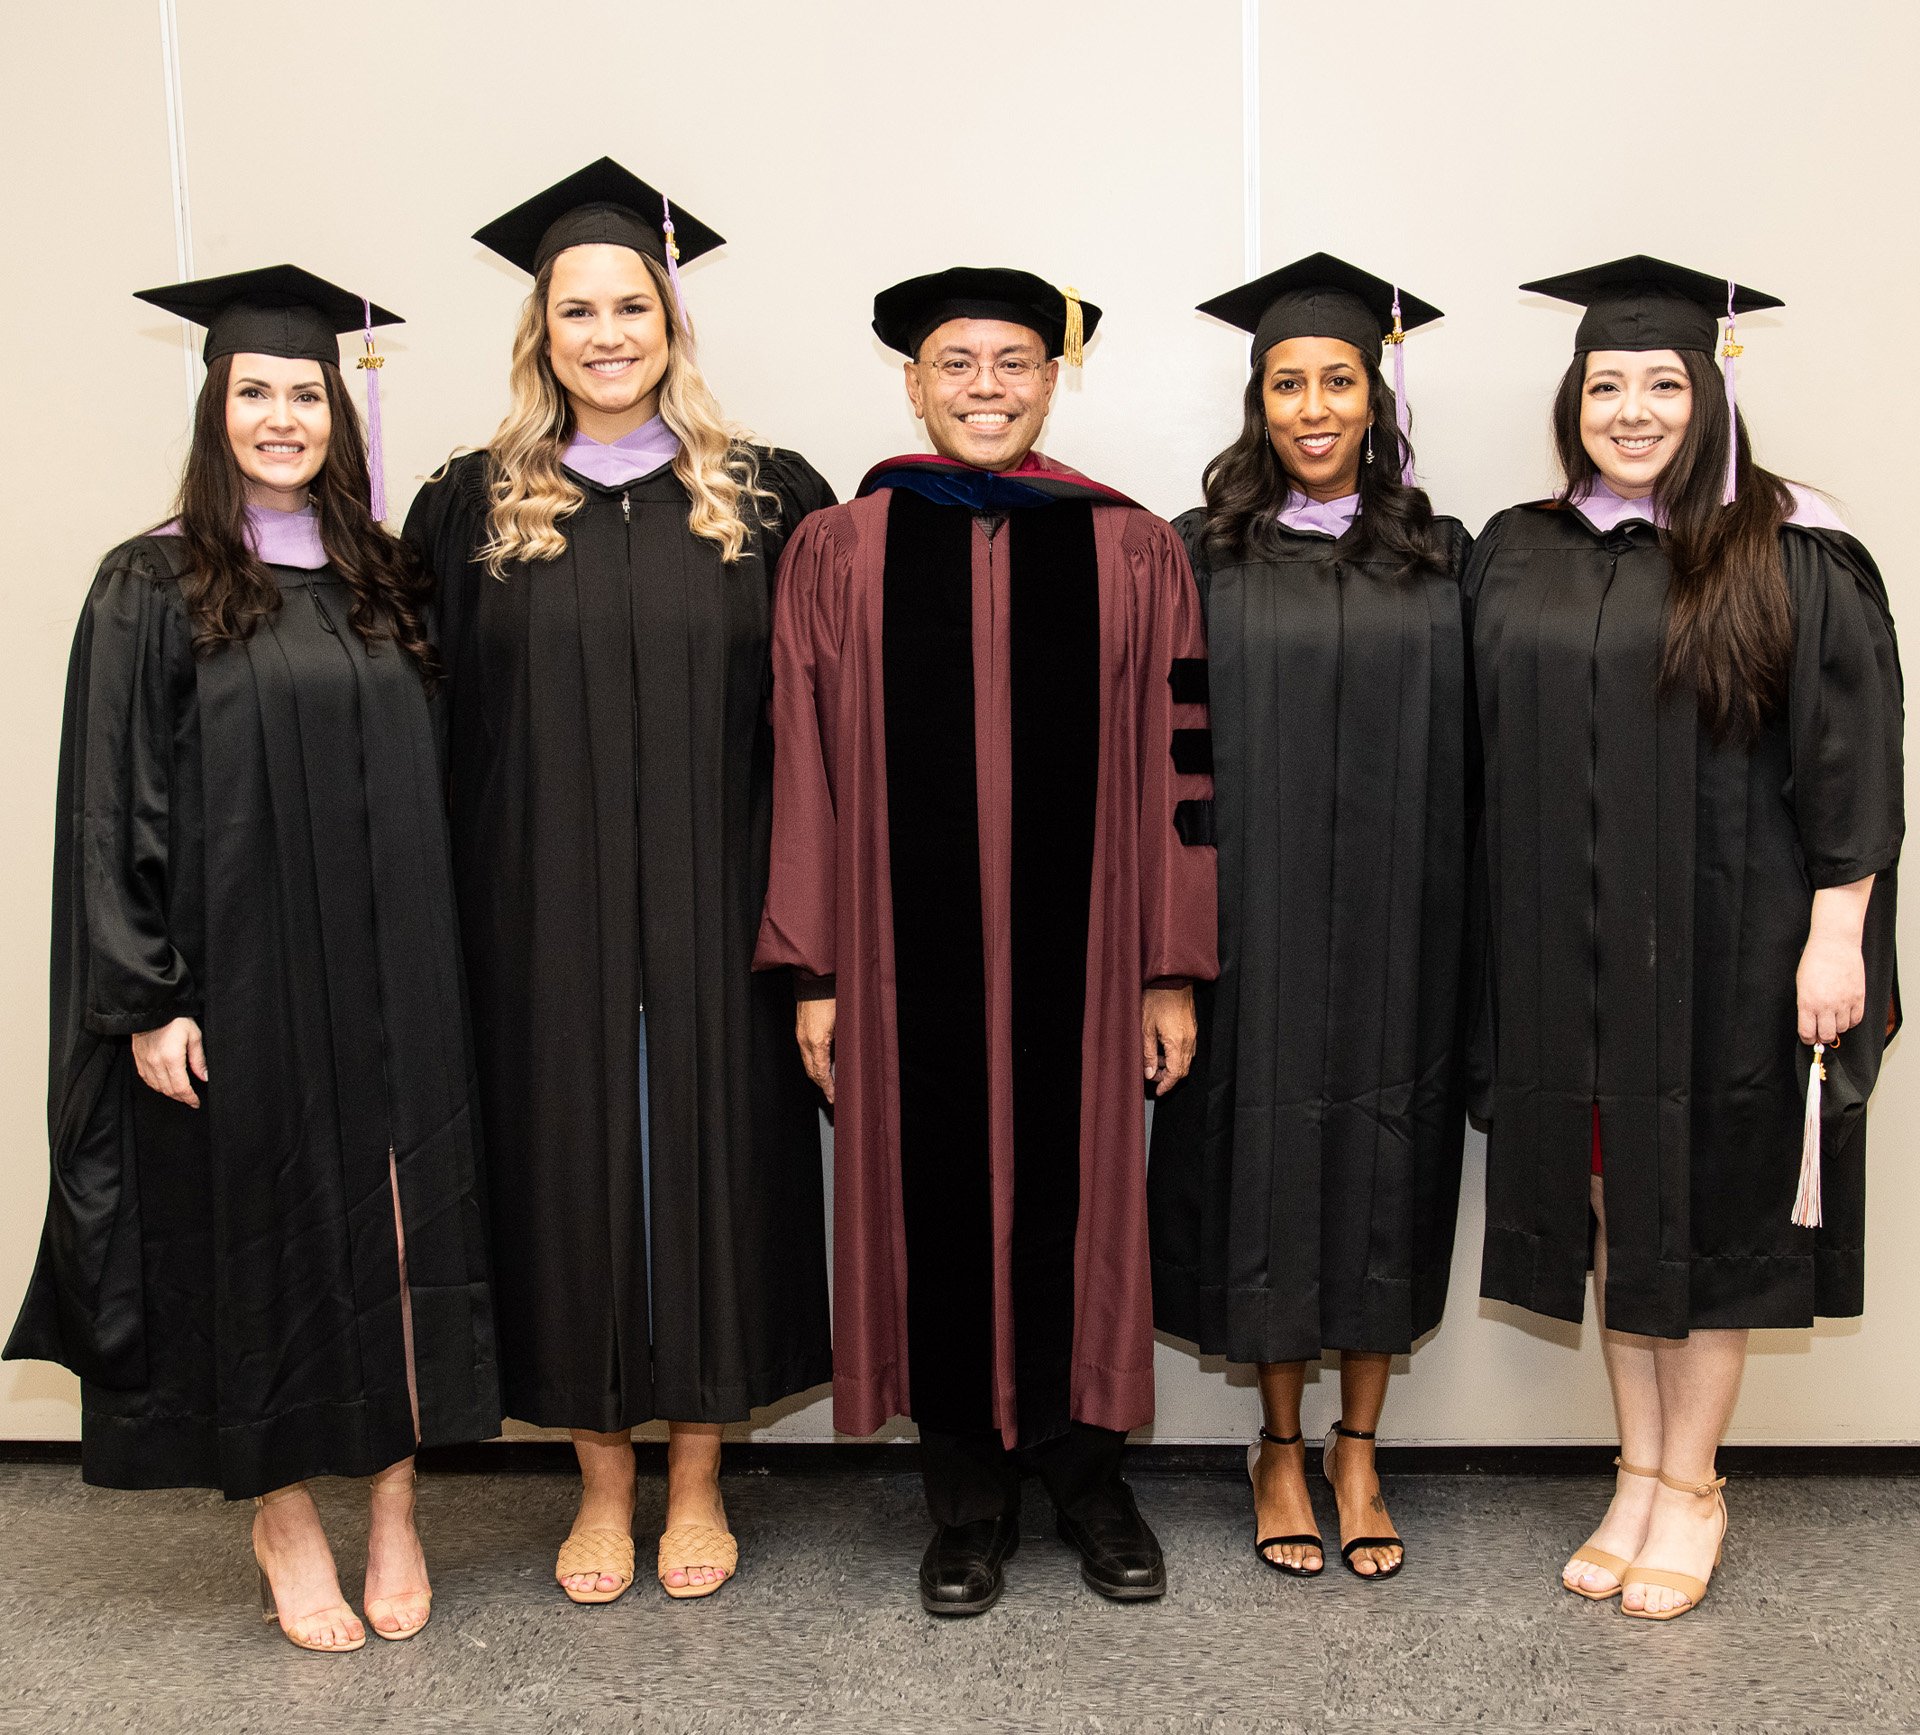 The four-member Master of Science in Dental Hygiene Class of 2023 stand with program coordinator Harold A. Henson, RDH, PhD.